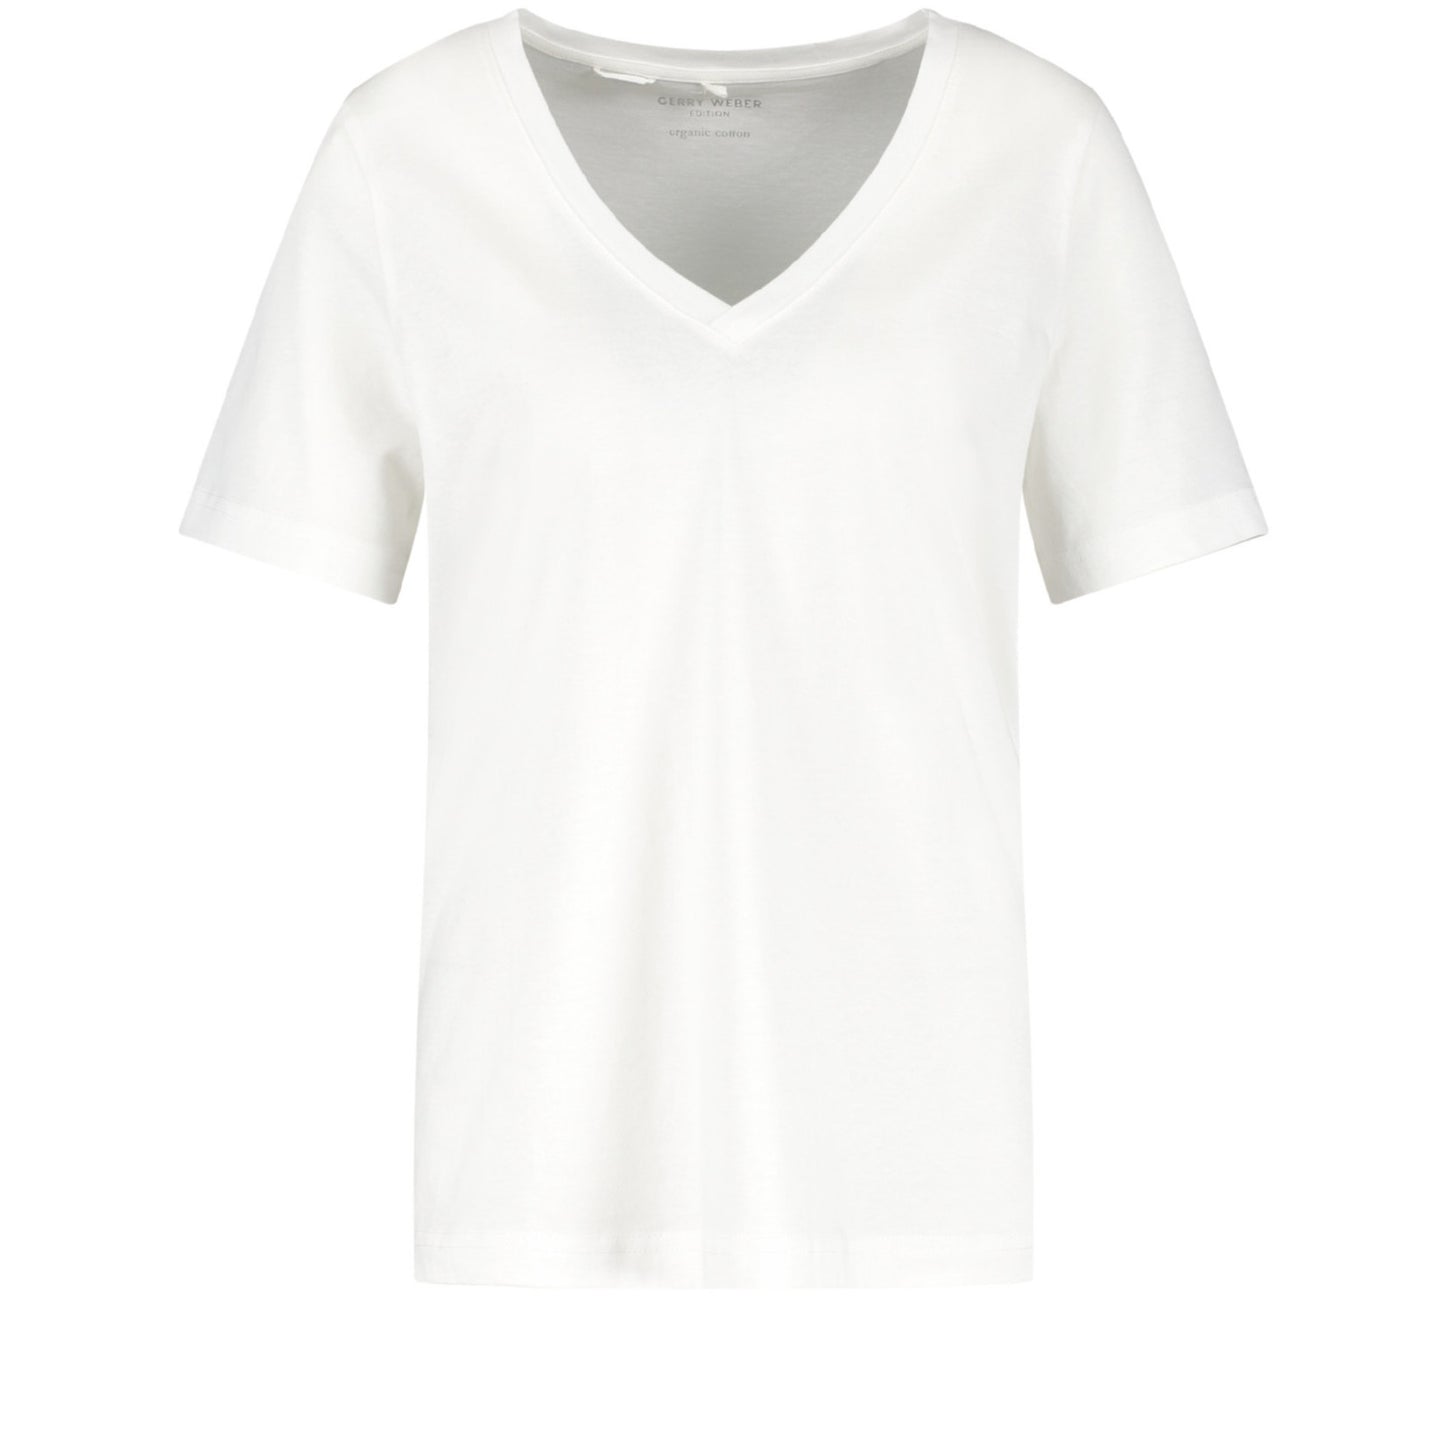 Gerry Weber 97654 44050 99700 Off-White Top